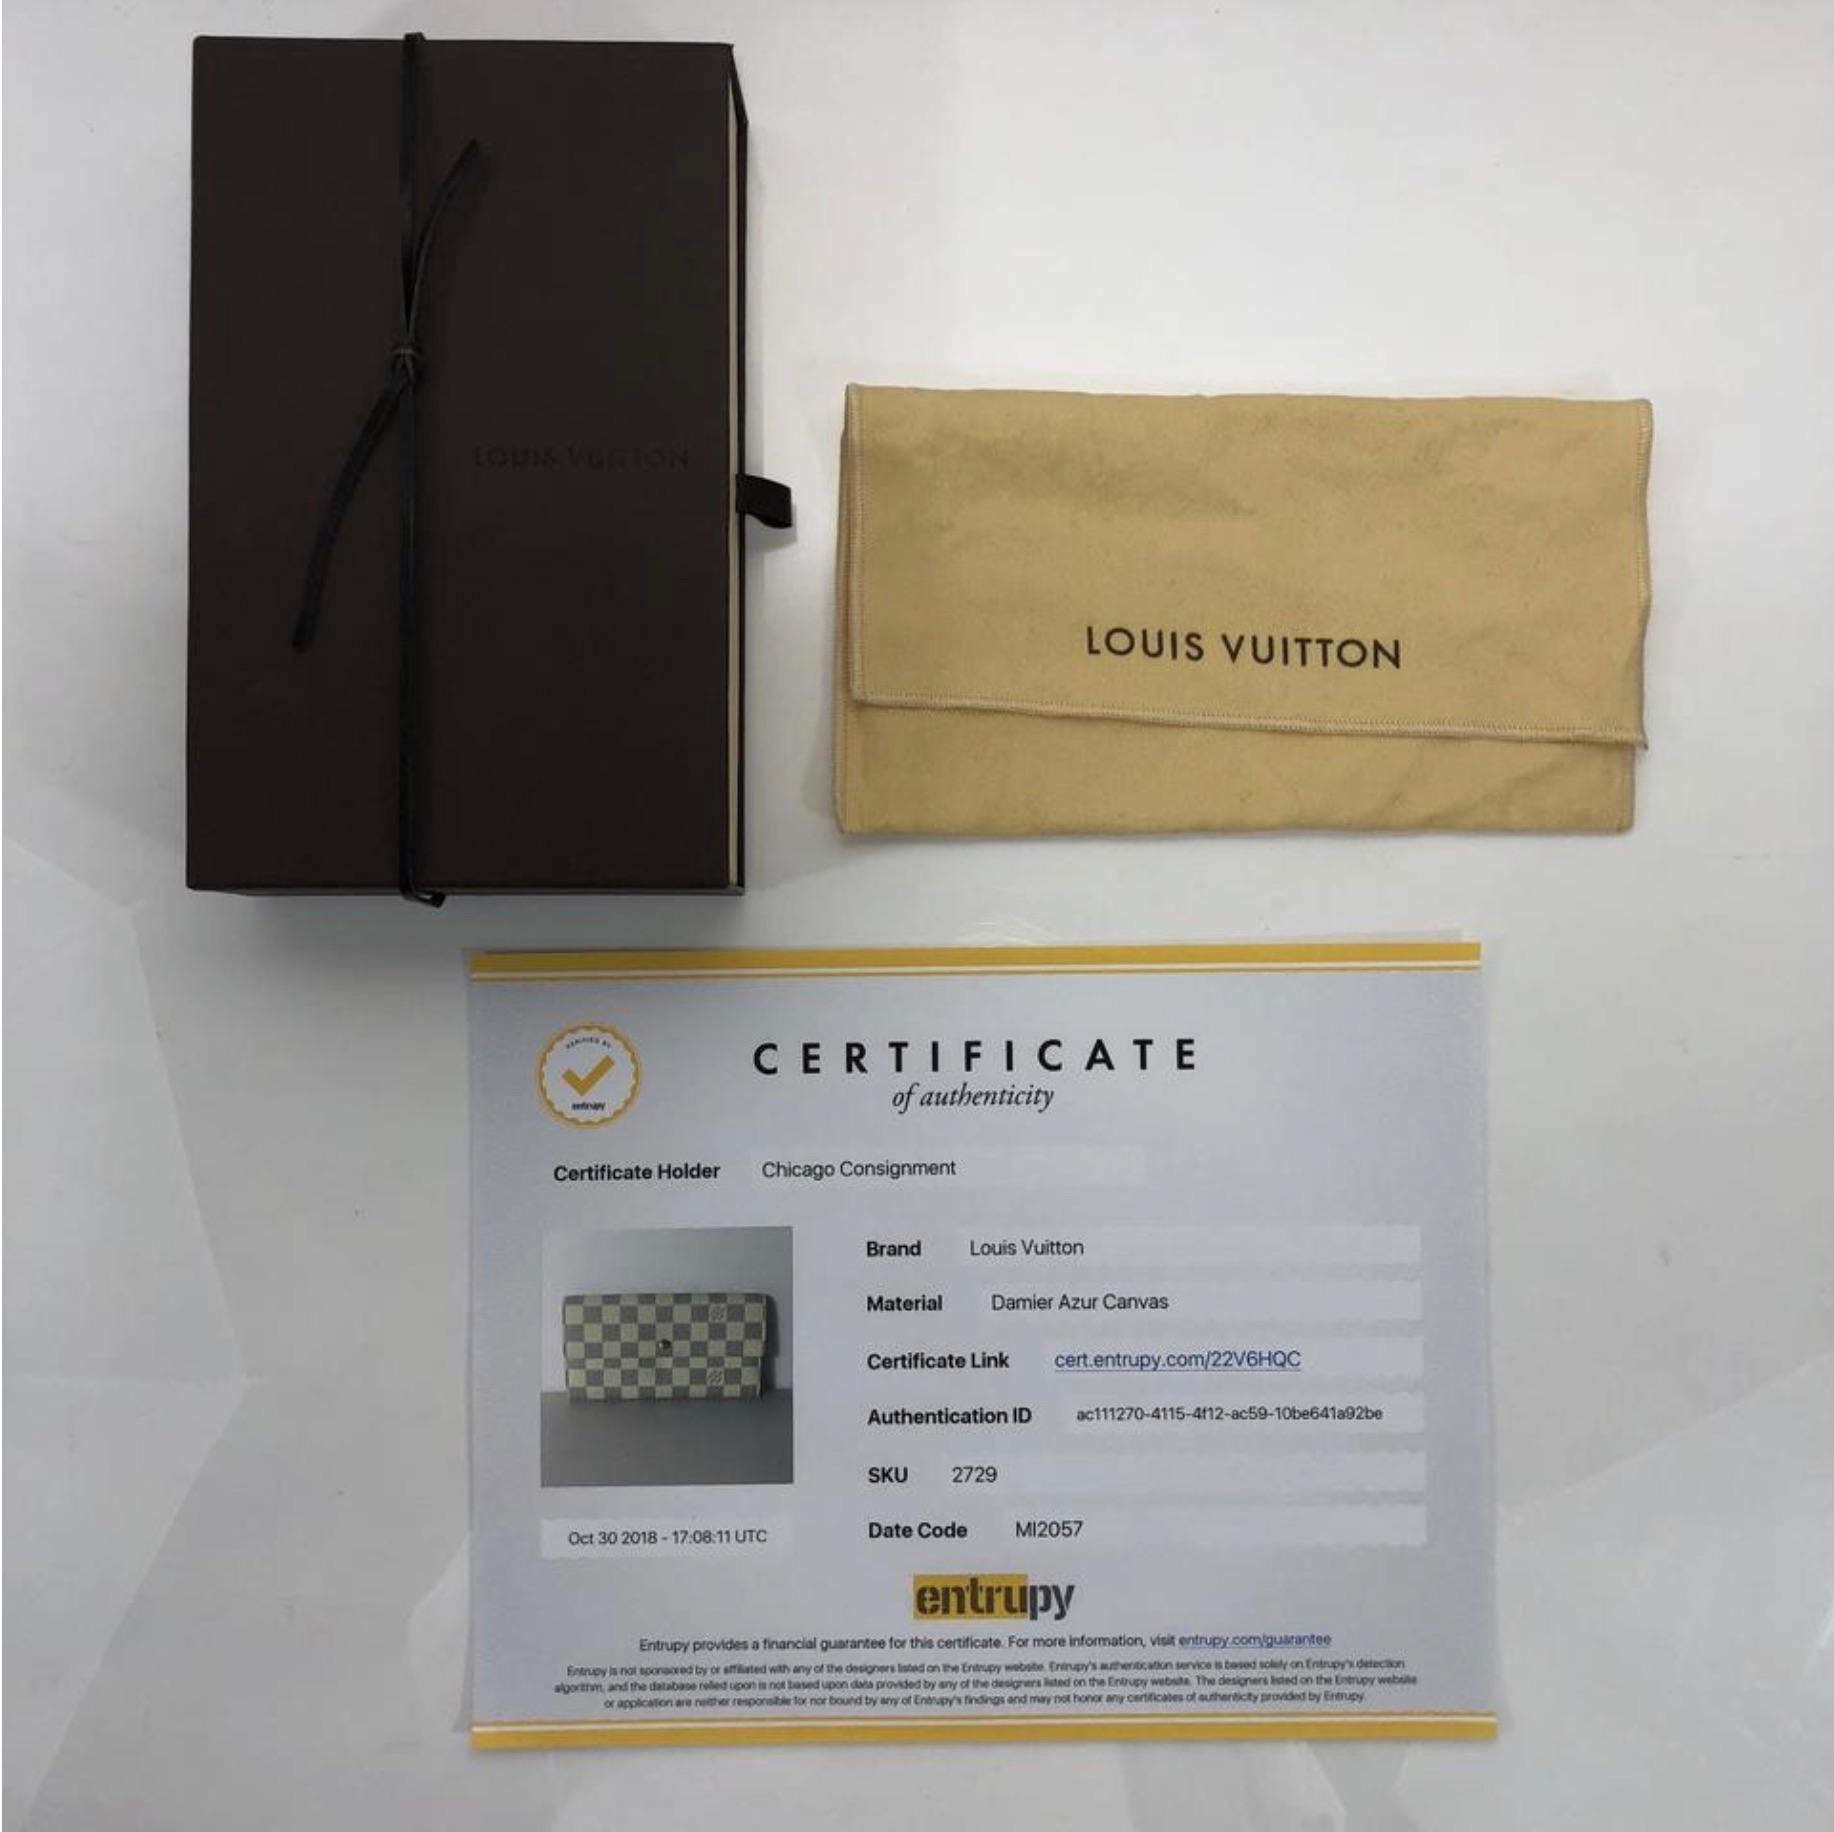 MODEL - Louis Vuitton Damier Azur Sarah Wallet

CONDITION - Exceptional! No watermarks, no handle darkening, no dryness. Bright and shiny hardware with no tarnishing. Hawaii heat stamp on interior. No rips, holes, tears, or odors. Light smudging on